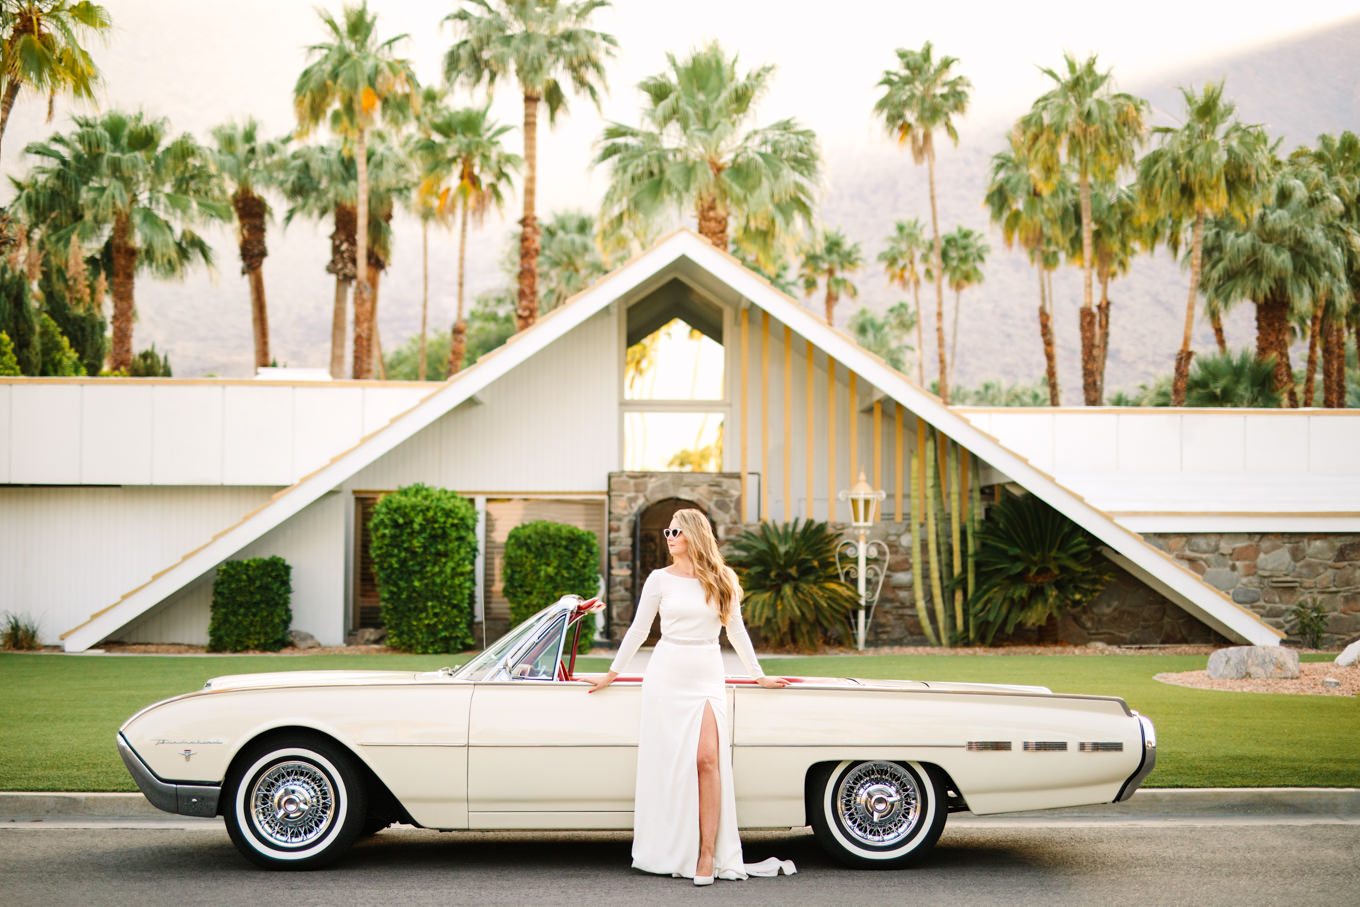 Bride posing with classic Ford Thunderbird car | Colorful jewel tone Palm Springs elopement | Fresh and colorful photography for fun-loving couples in Southern California | #colorfulelopement #palmspringselopement #elopementphotography #palmspringswedding Source: Mary Costa Photography | Los Angeles